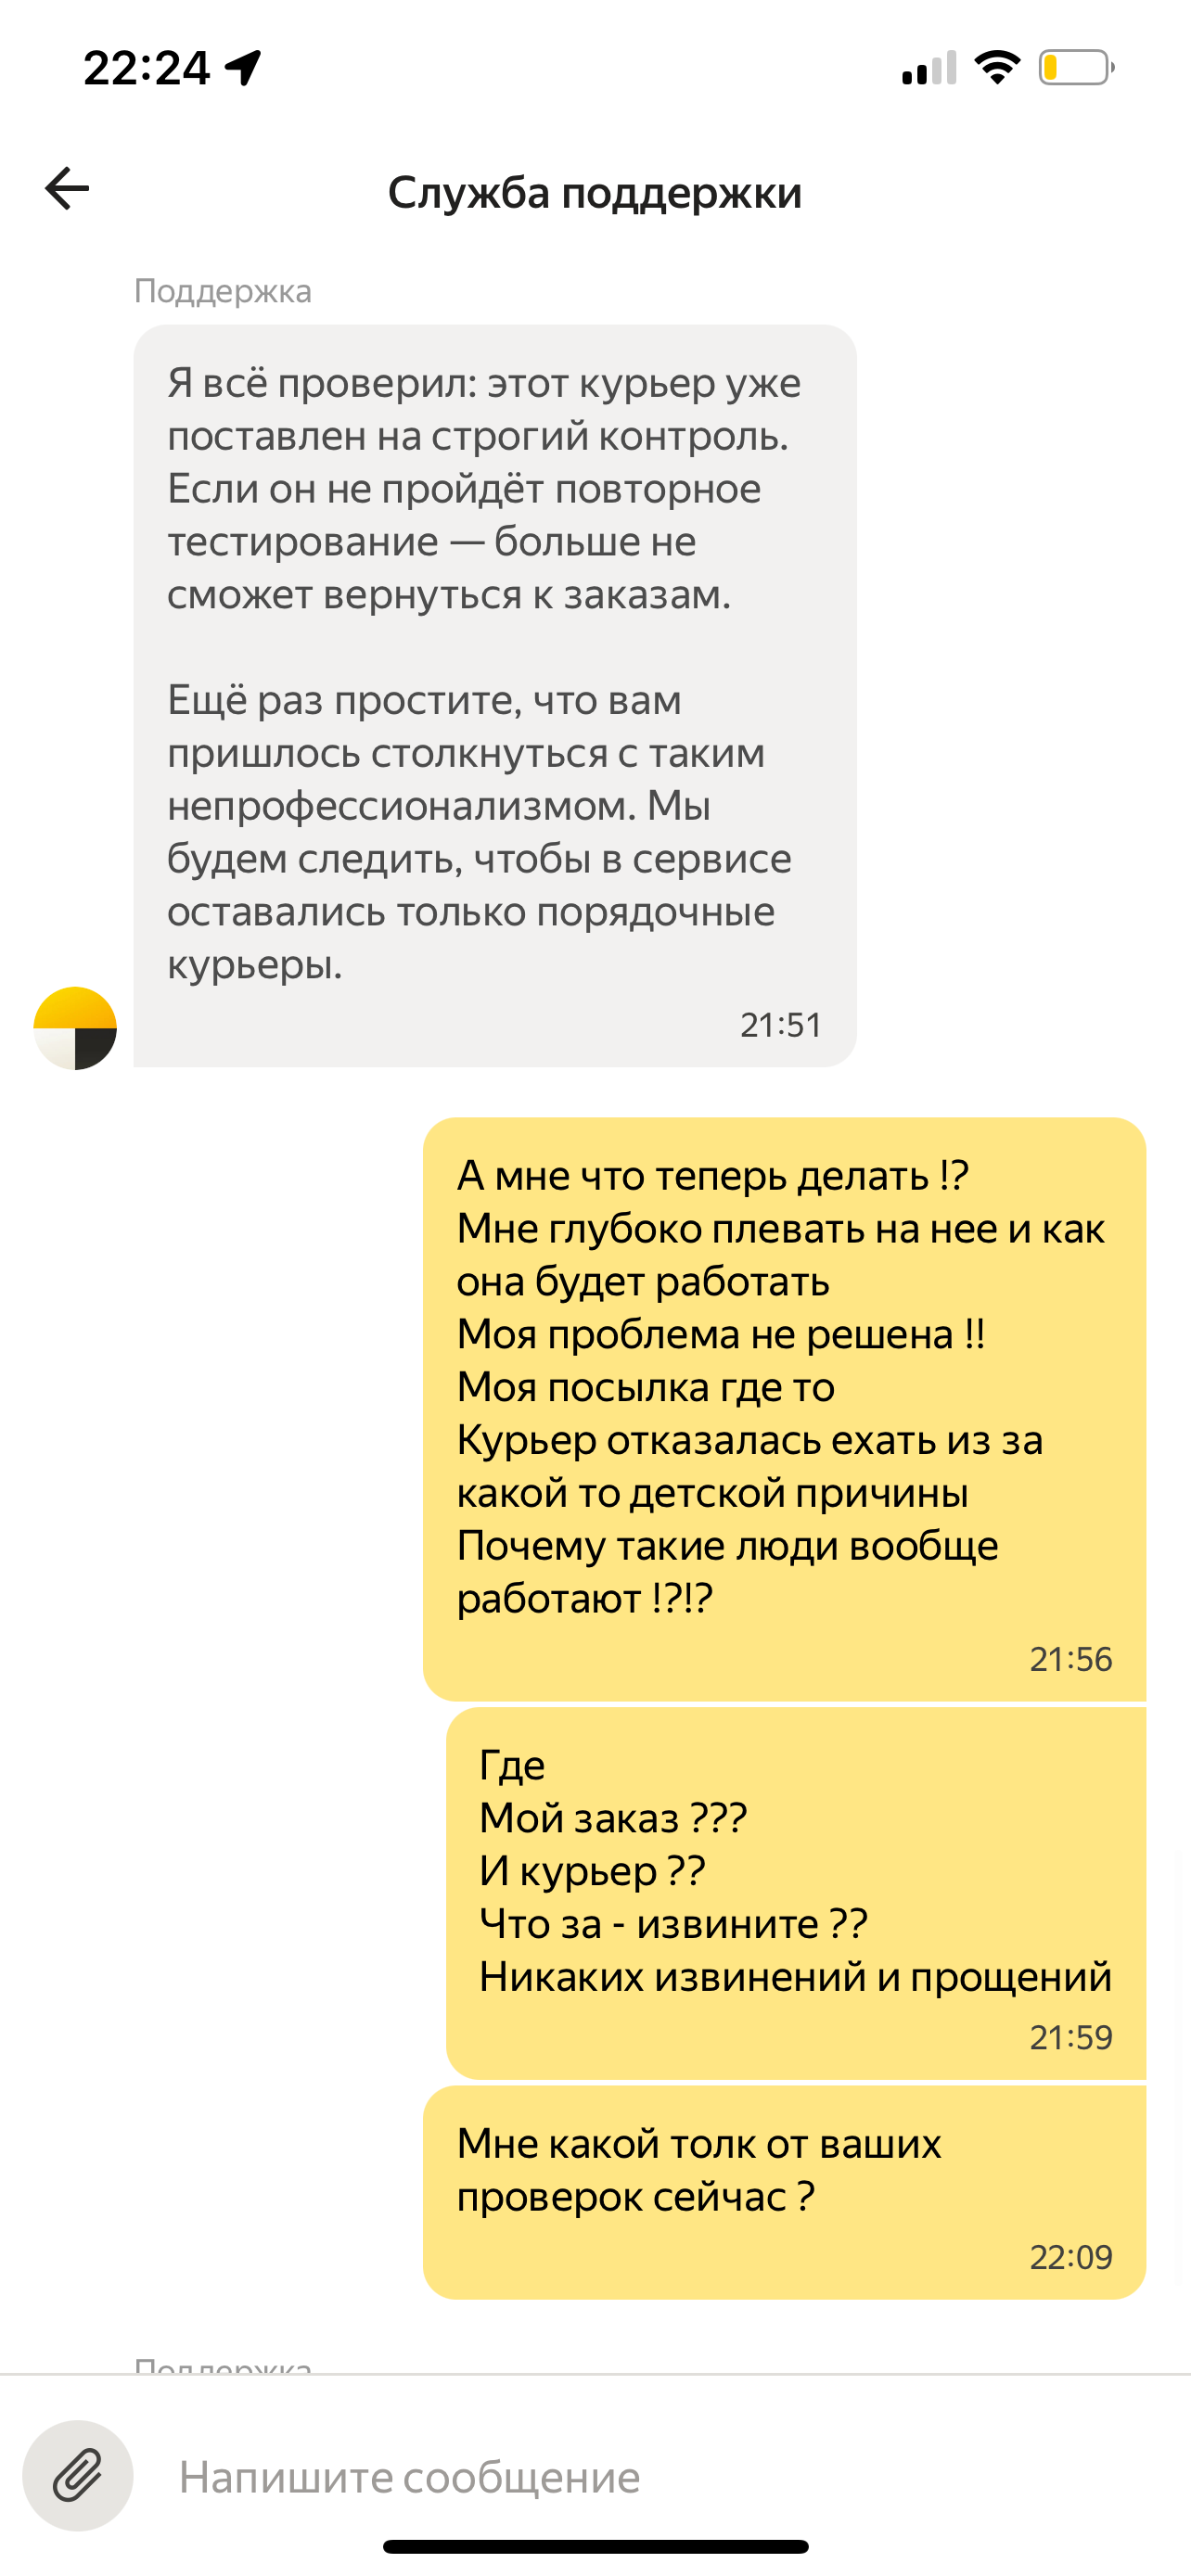 YandexGo - your order, not our problem - Yandex Taxi, Courier, A complaint, Yandex., Order, Lost things, Longpost